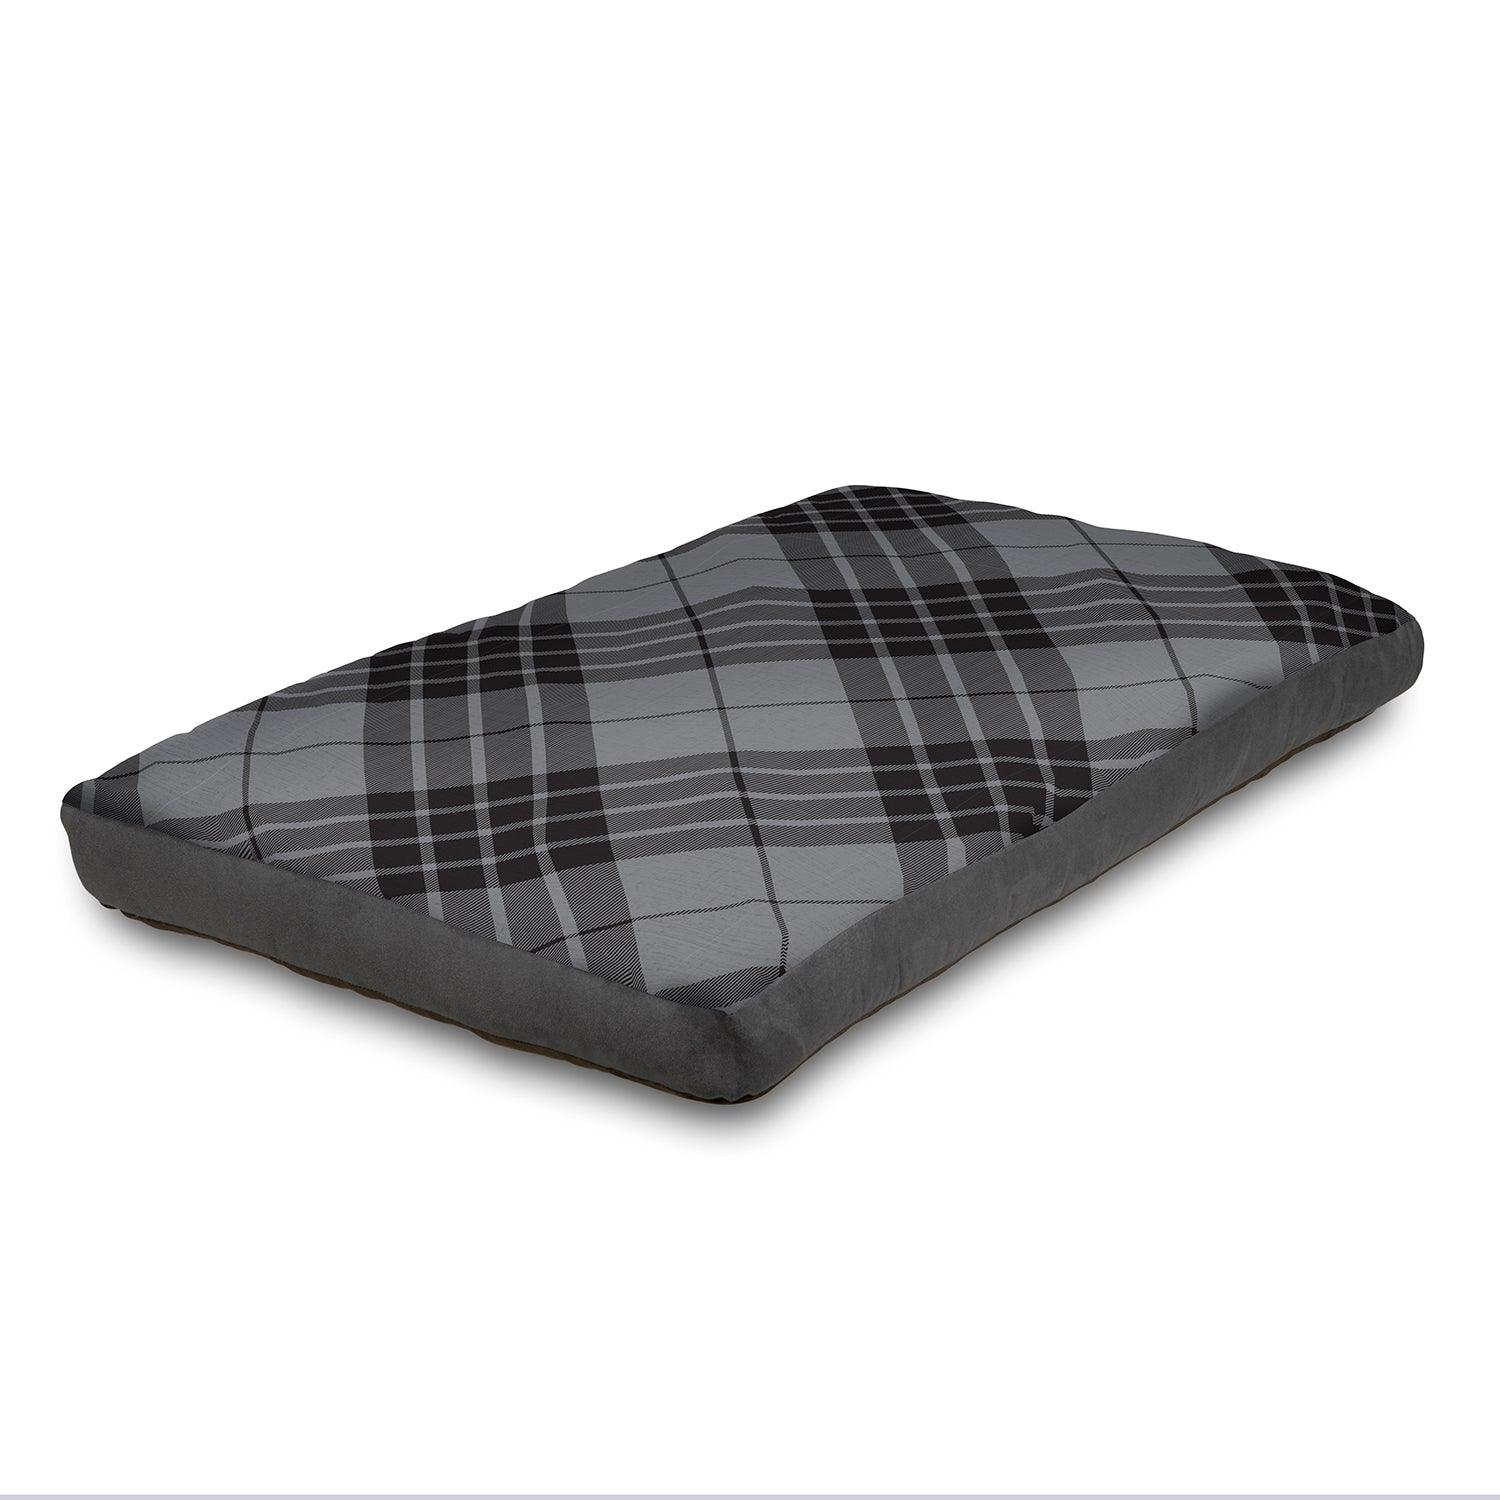 View Super Comfy Dog Bed Soft and Fluffy with Washable Cover Medium 100 cm x 65 cm Black information